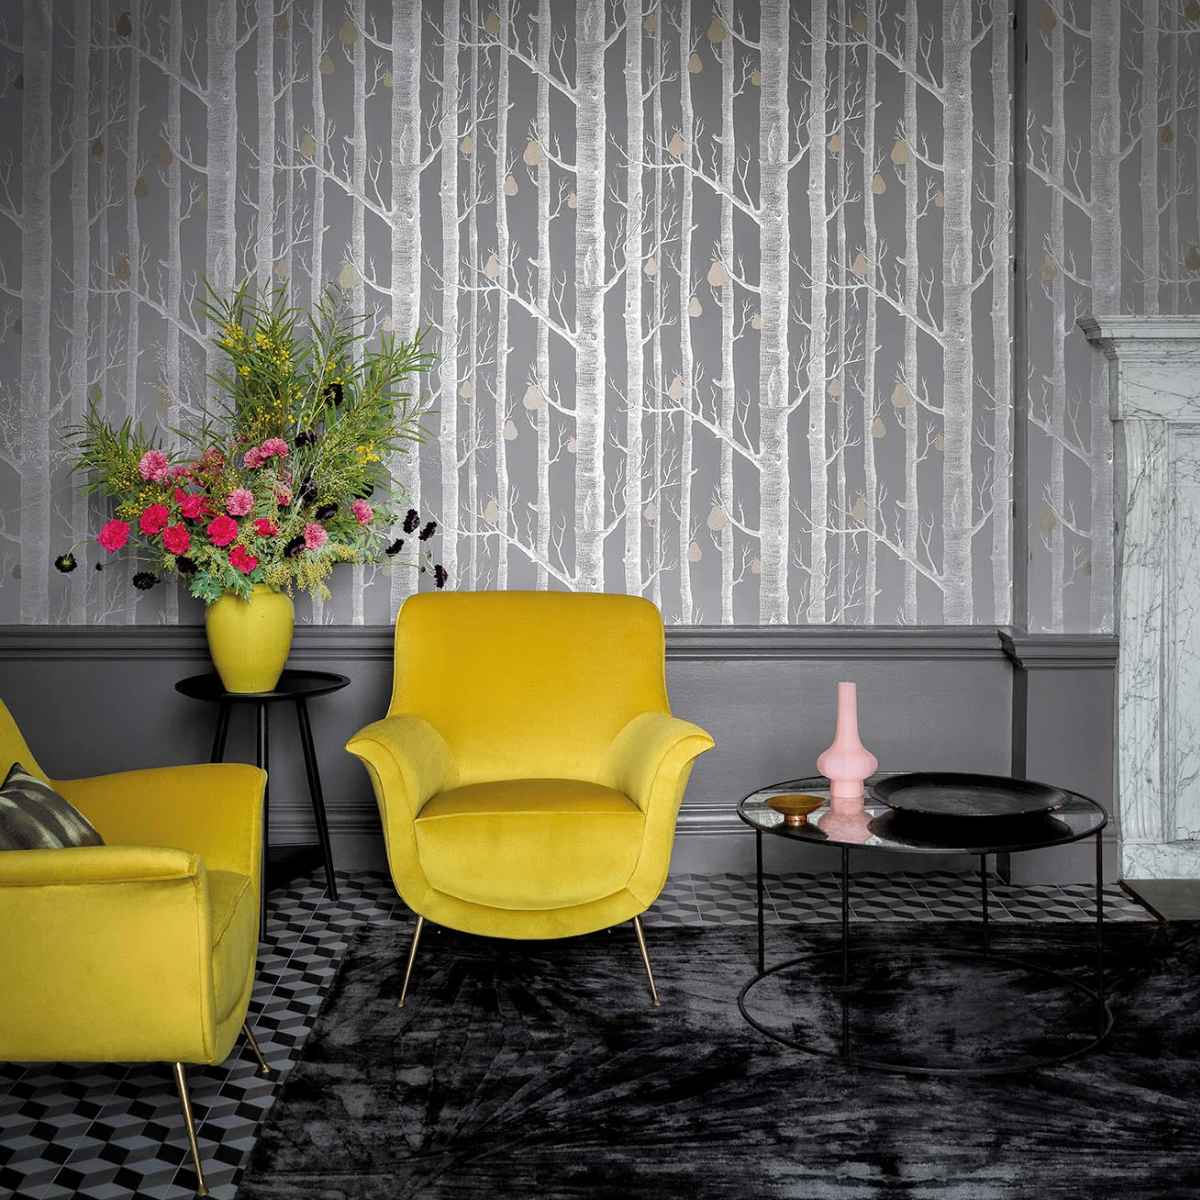 Cole &amp; Son &#39;Woods and Pears - Metallic Silver &amp; Metallic Bronze on Lilac Grey&#39; Wallpaper